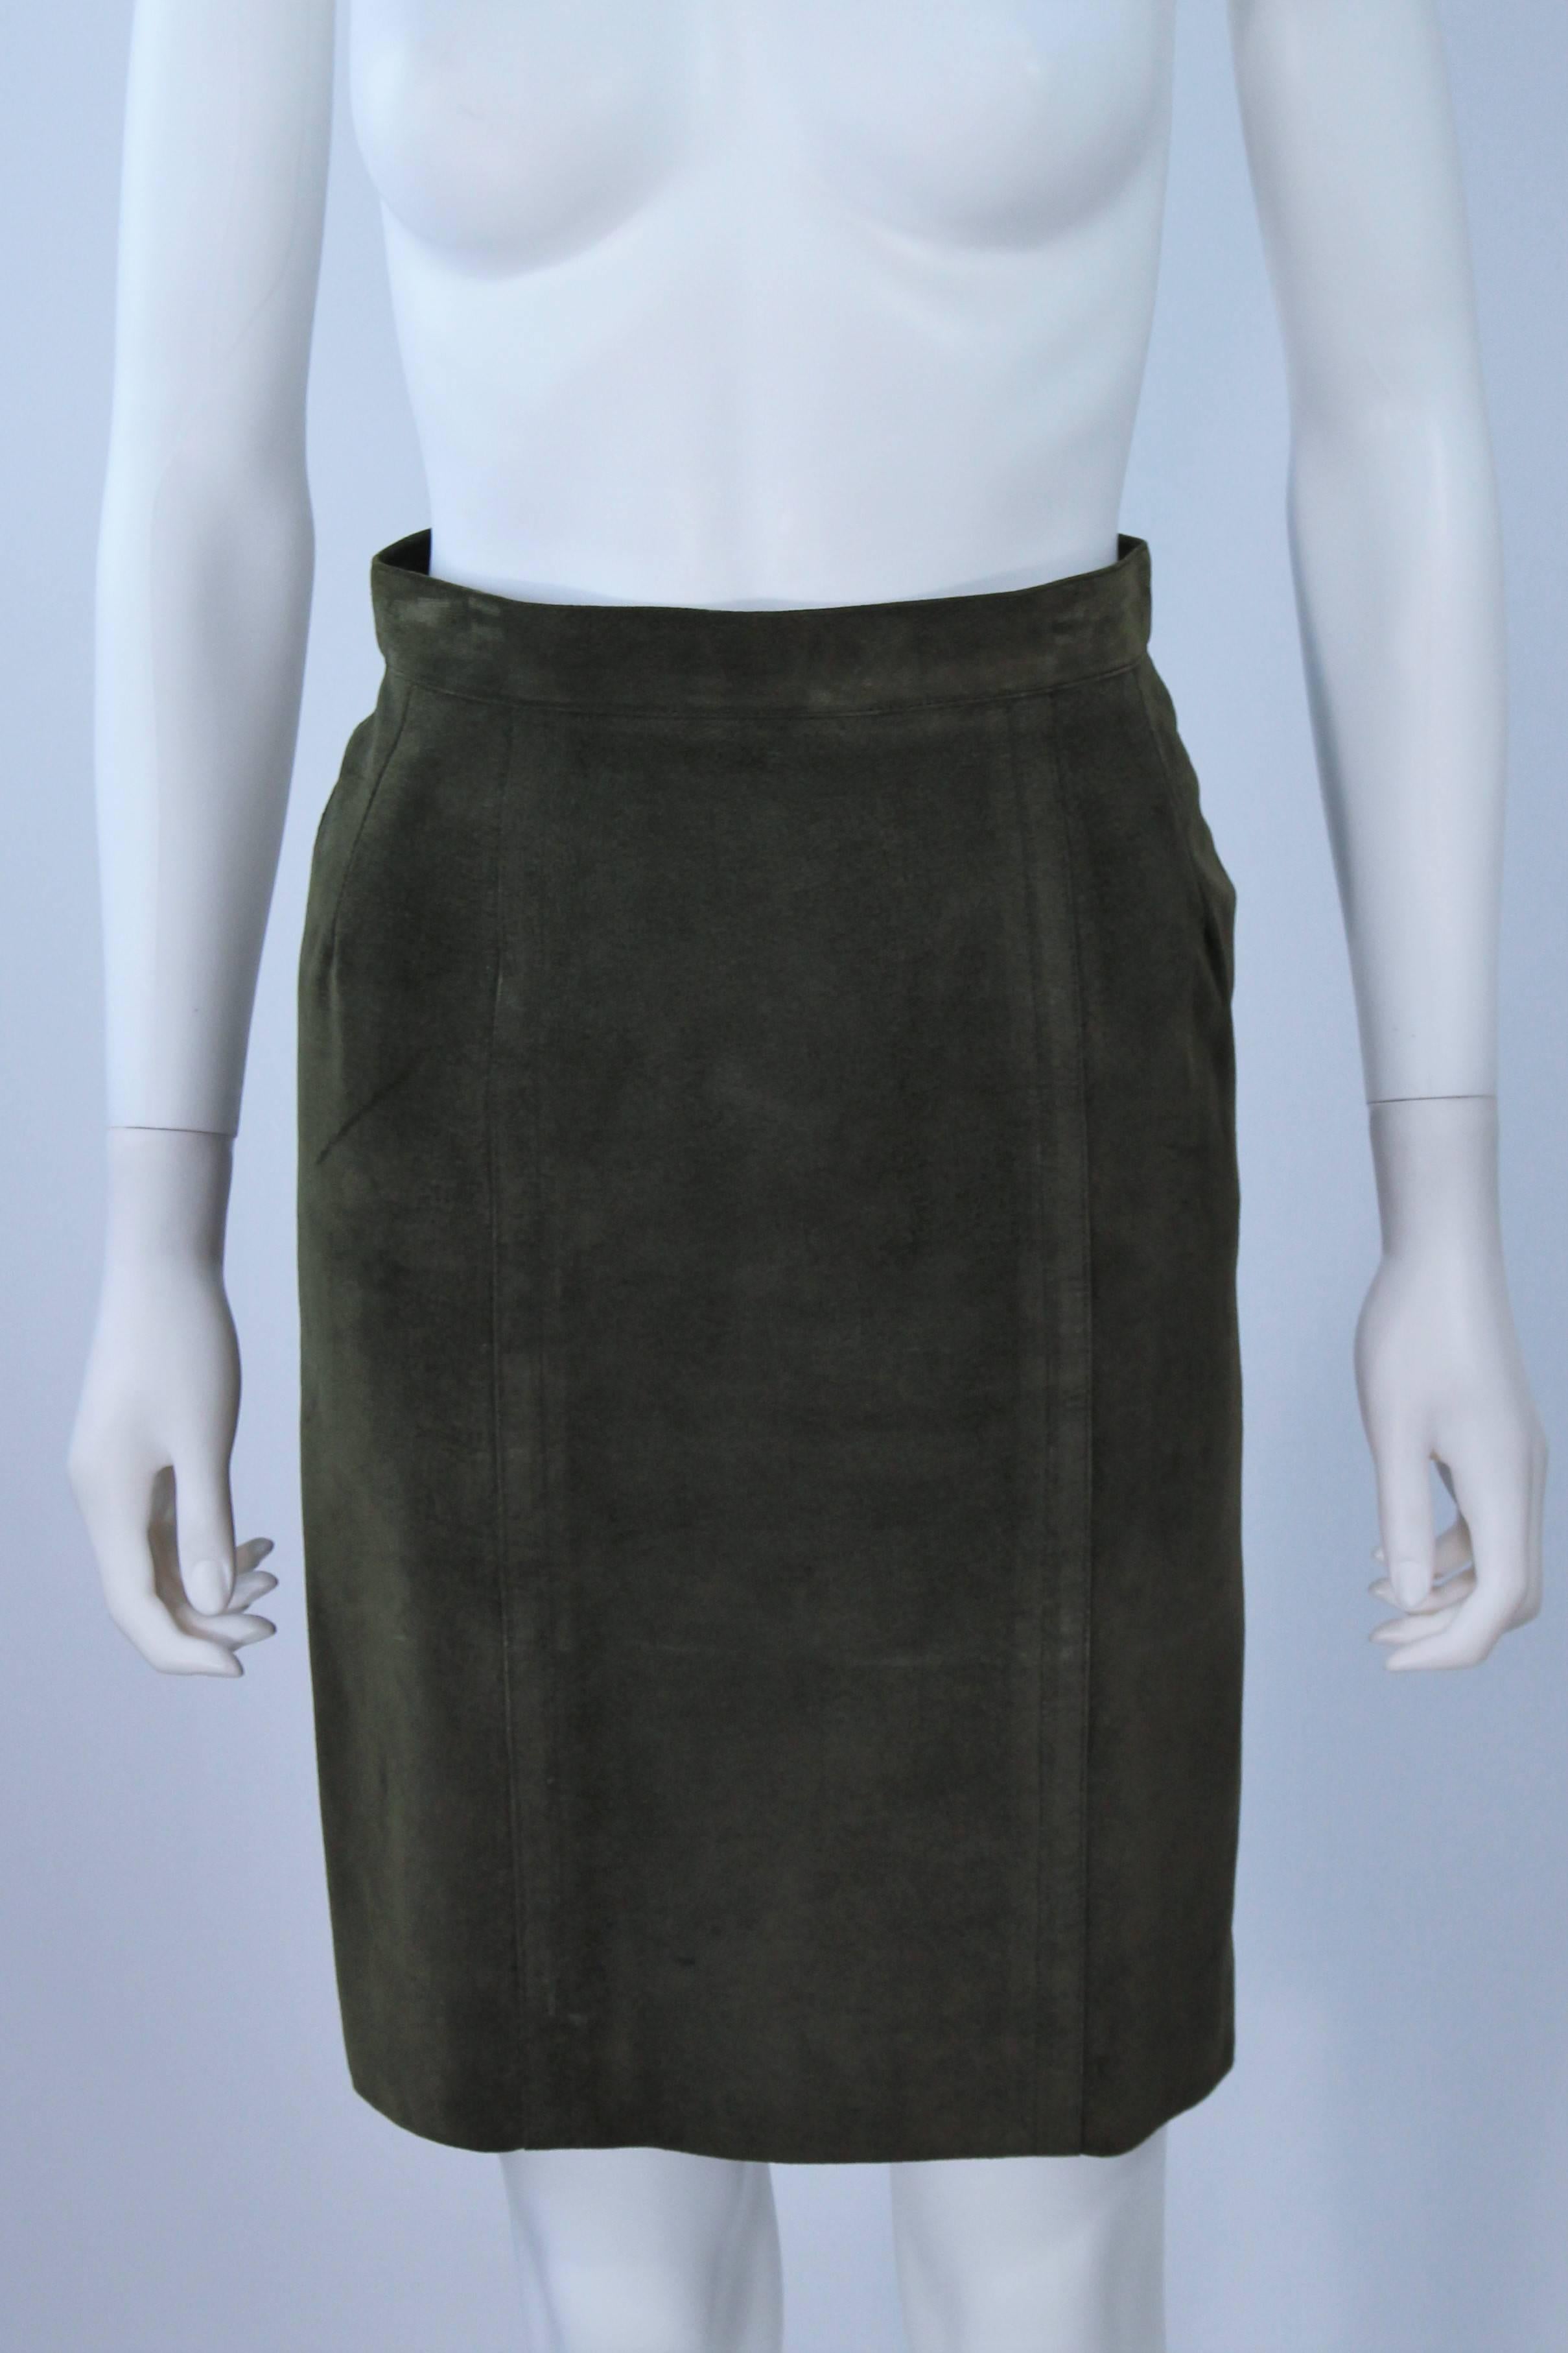 CHANEL Khaki Green Burgundy Skirt Suit with Green Suede Skirt Size 38 4